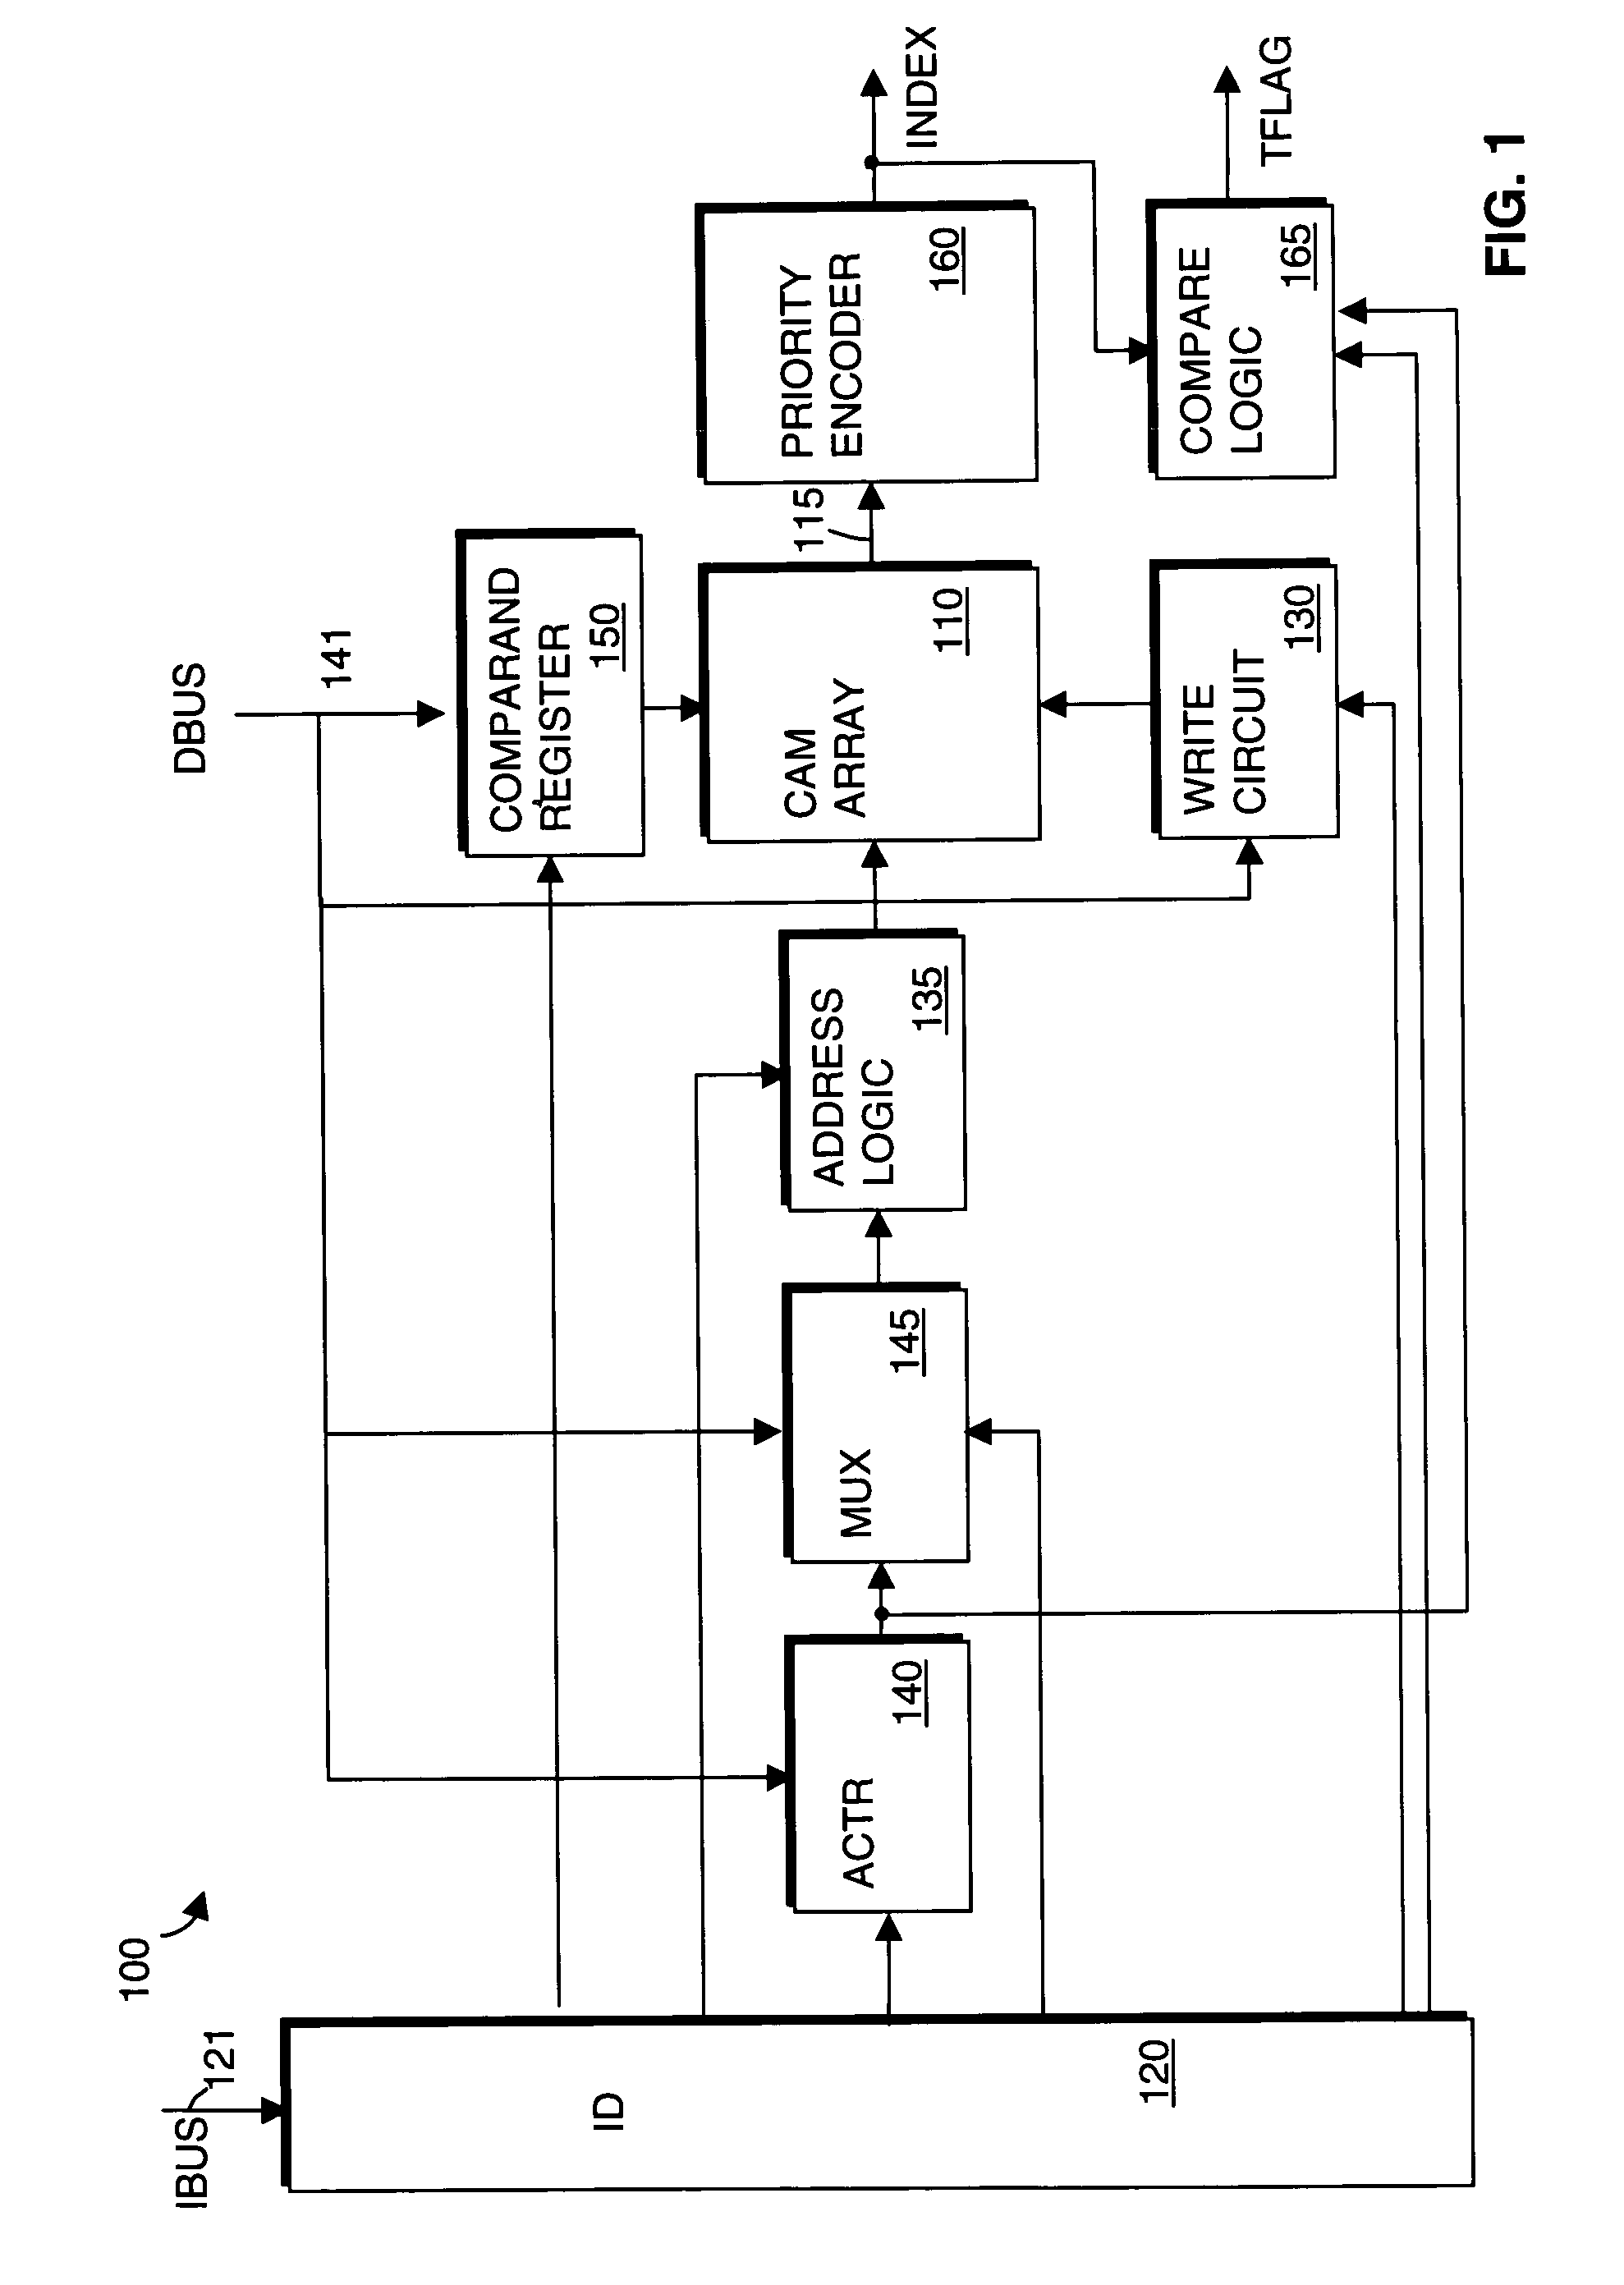 Method and apparatus for testing a content addressable memory device